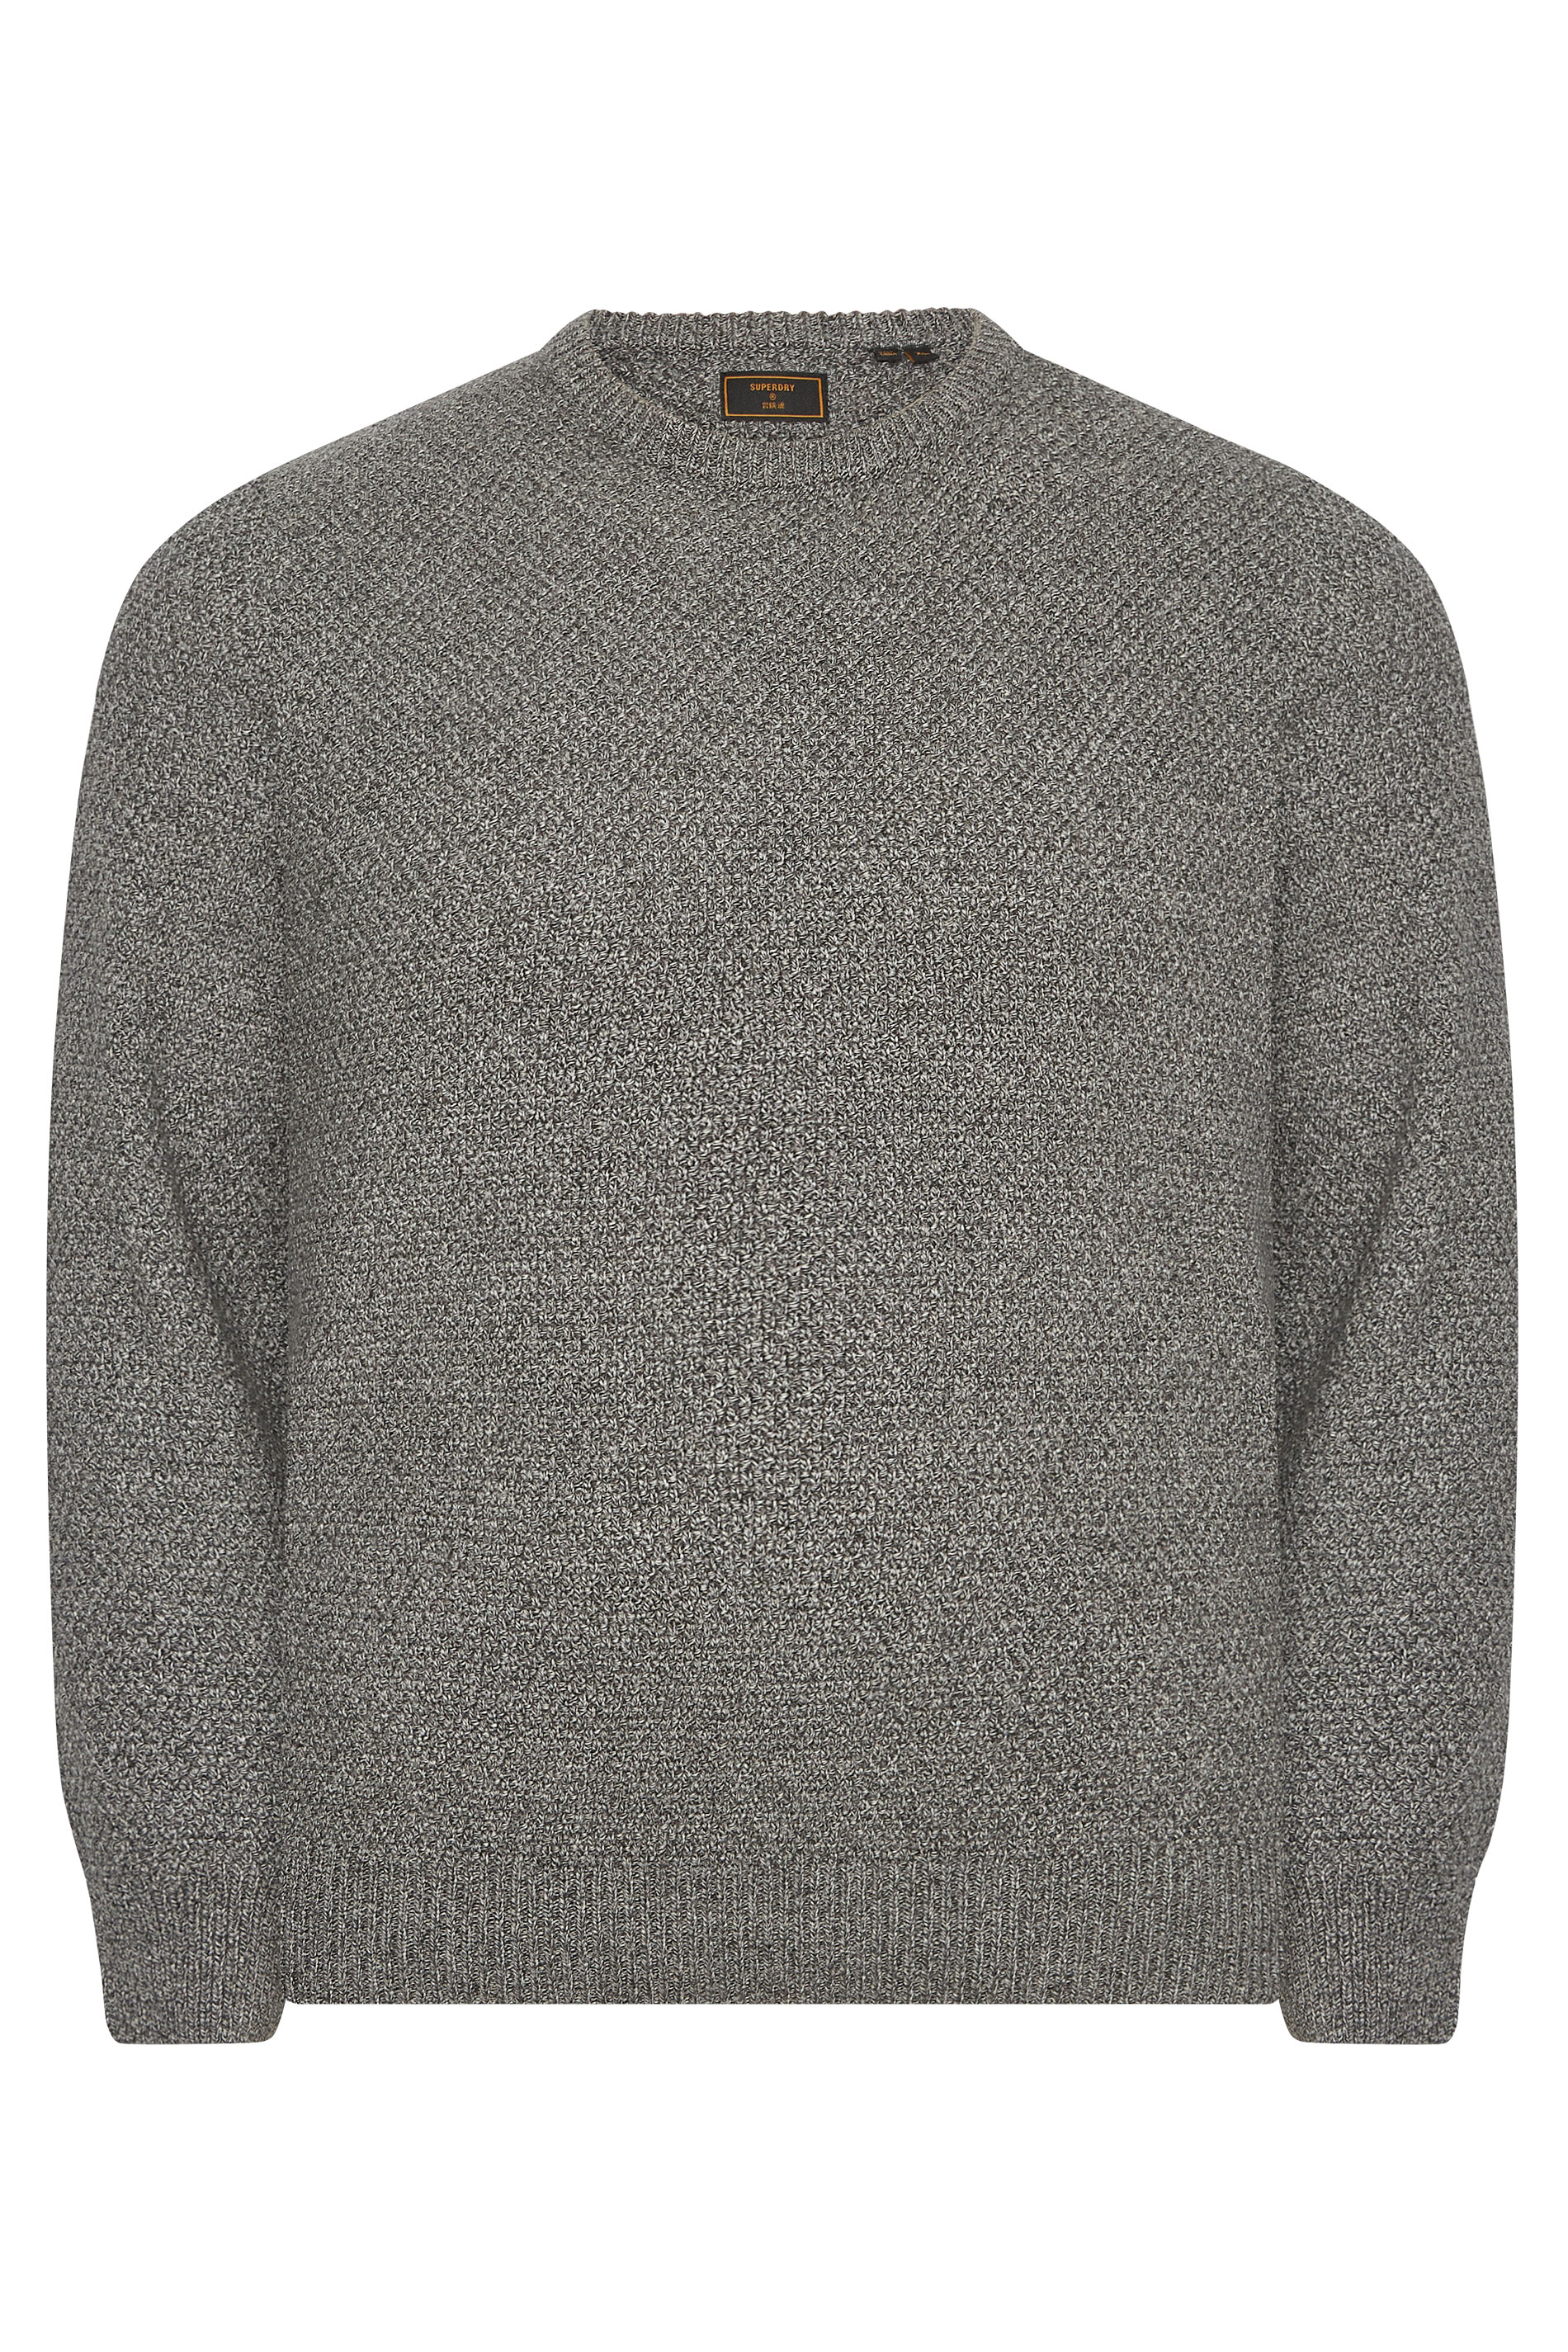 SUPERDRY Big & Tall Grey Knitted Jumper 1